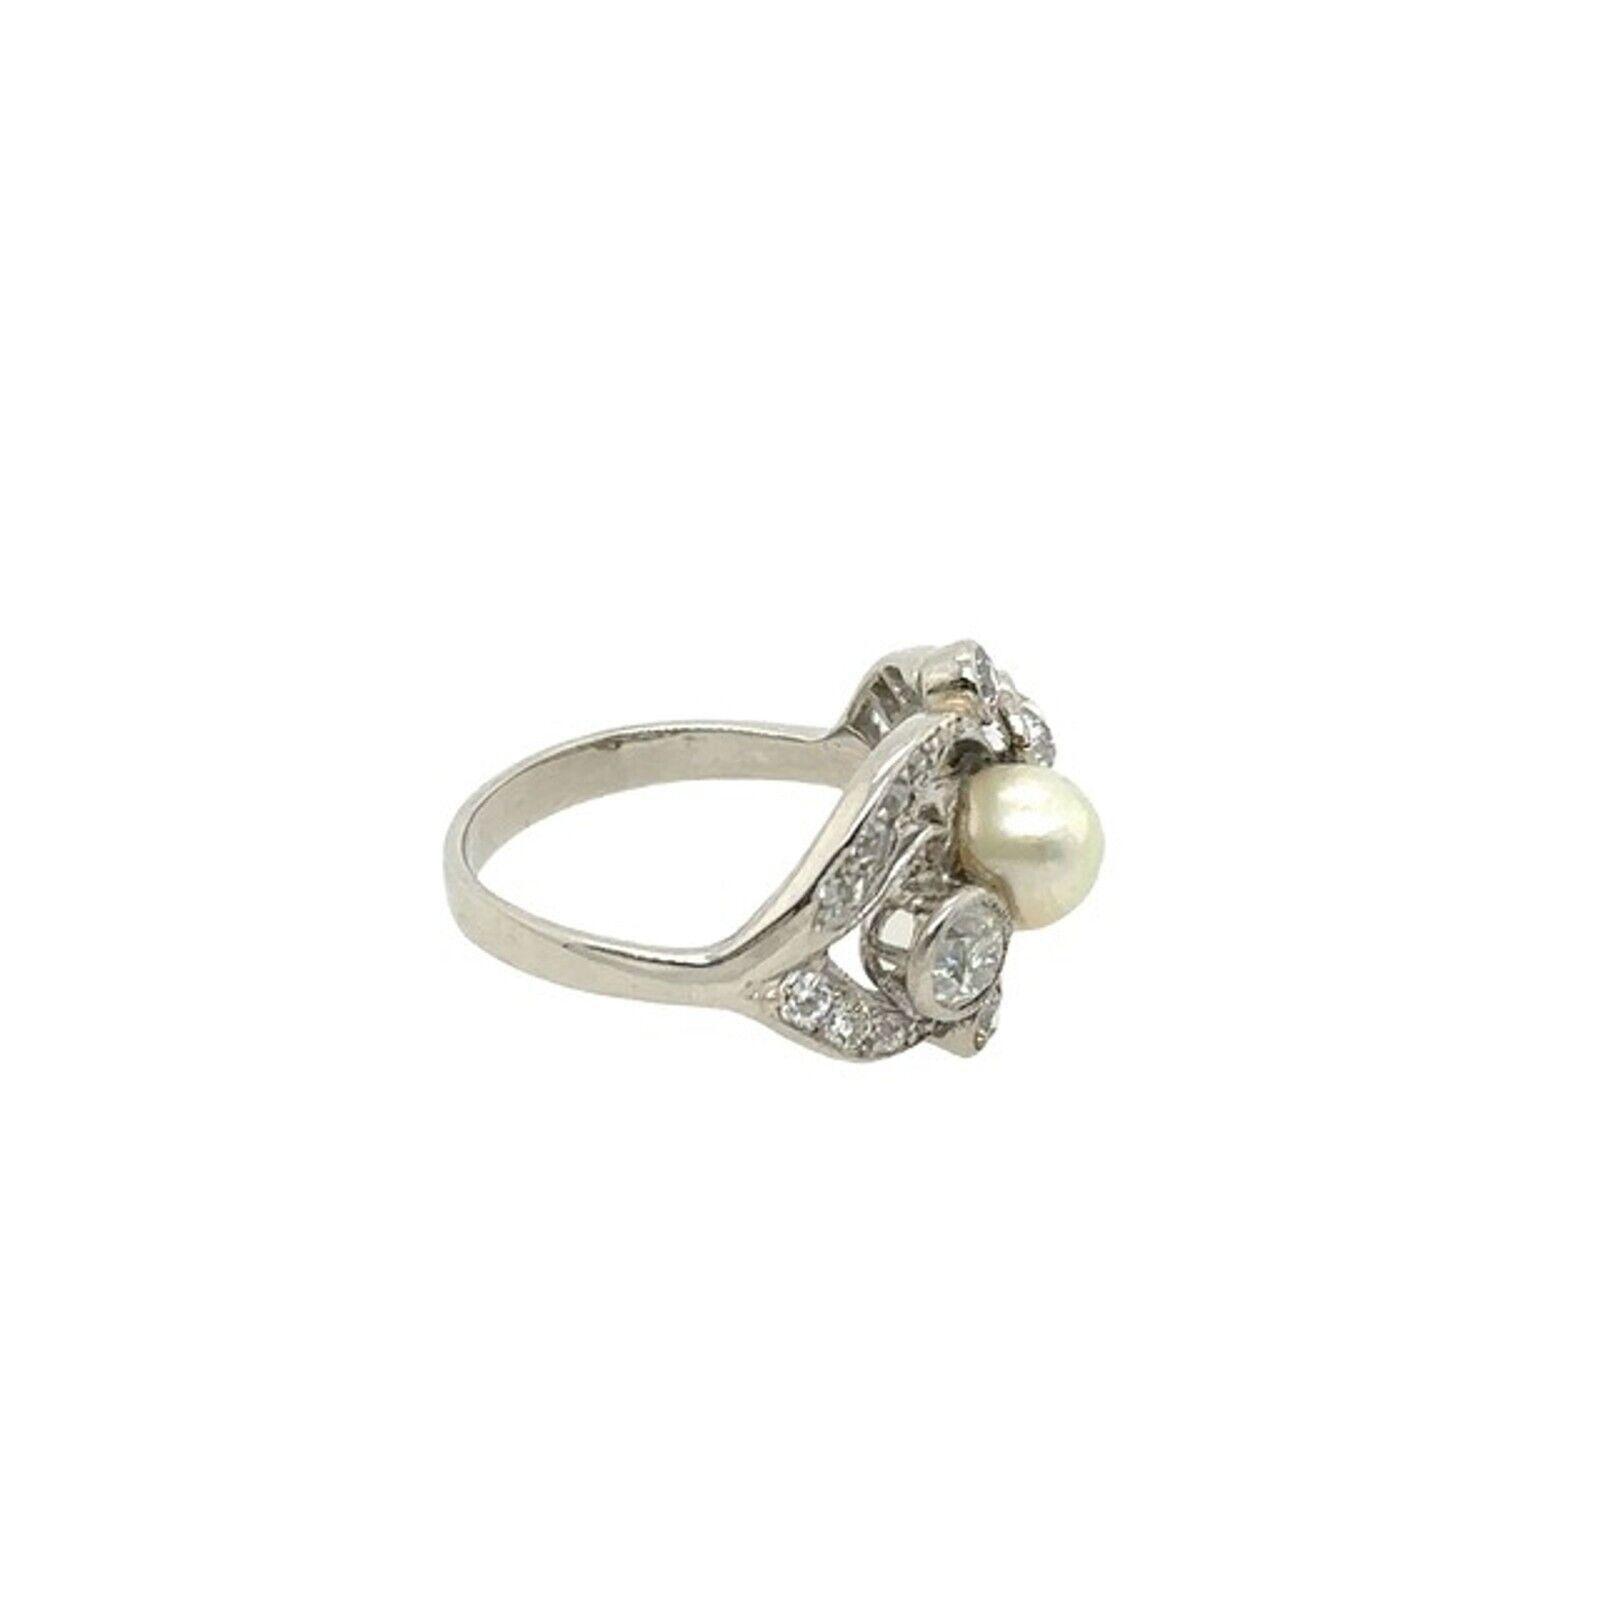 Vintage Diamond and Pearl Ring Set in Platinum 0.90ct of Diamonds In Excellent Condition For Sale In London, GB